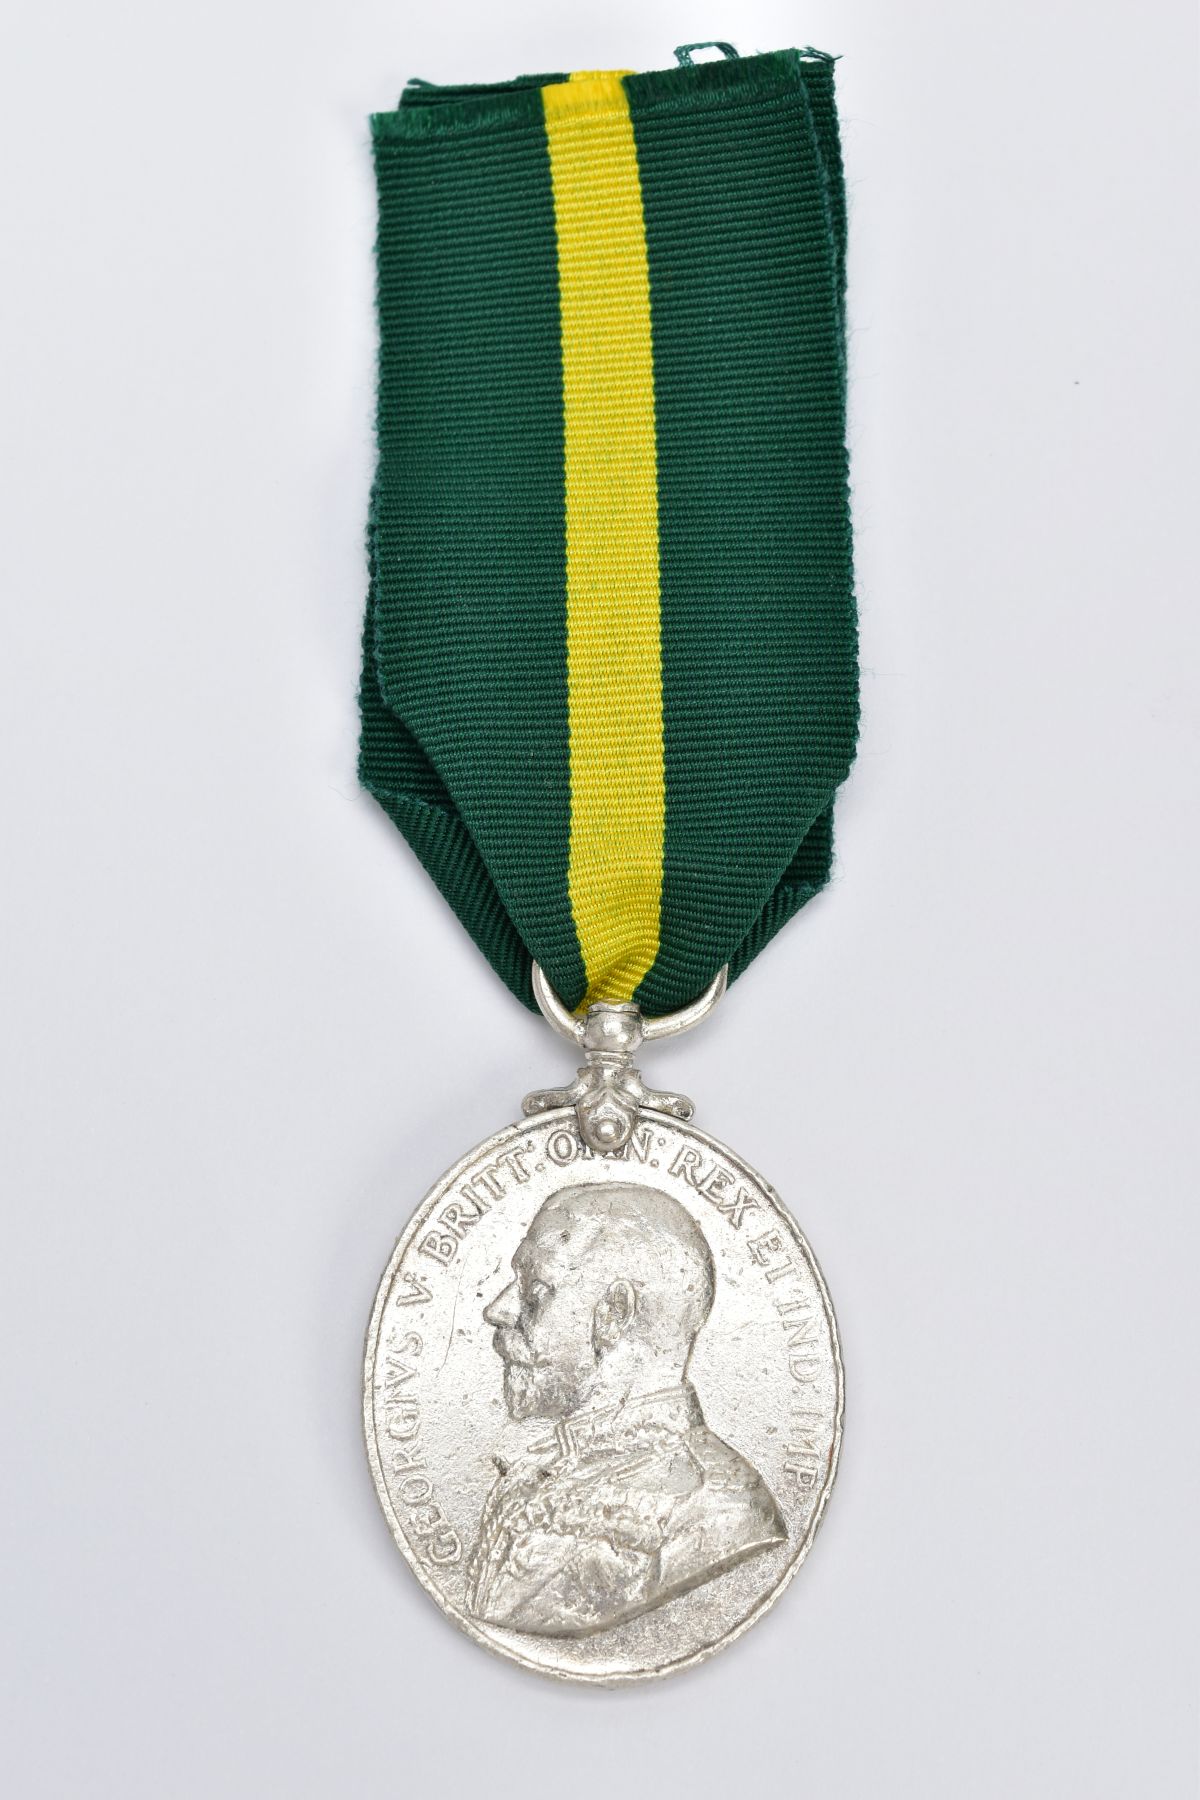 A GEORGE V MEDAL WITH RIBBON, an oval medal of 'Territorial Force Efficiency Medal' awarded to